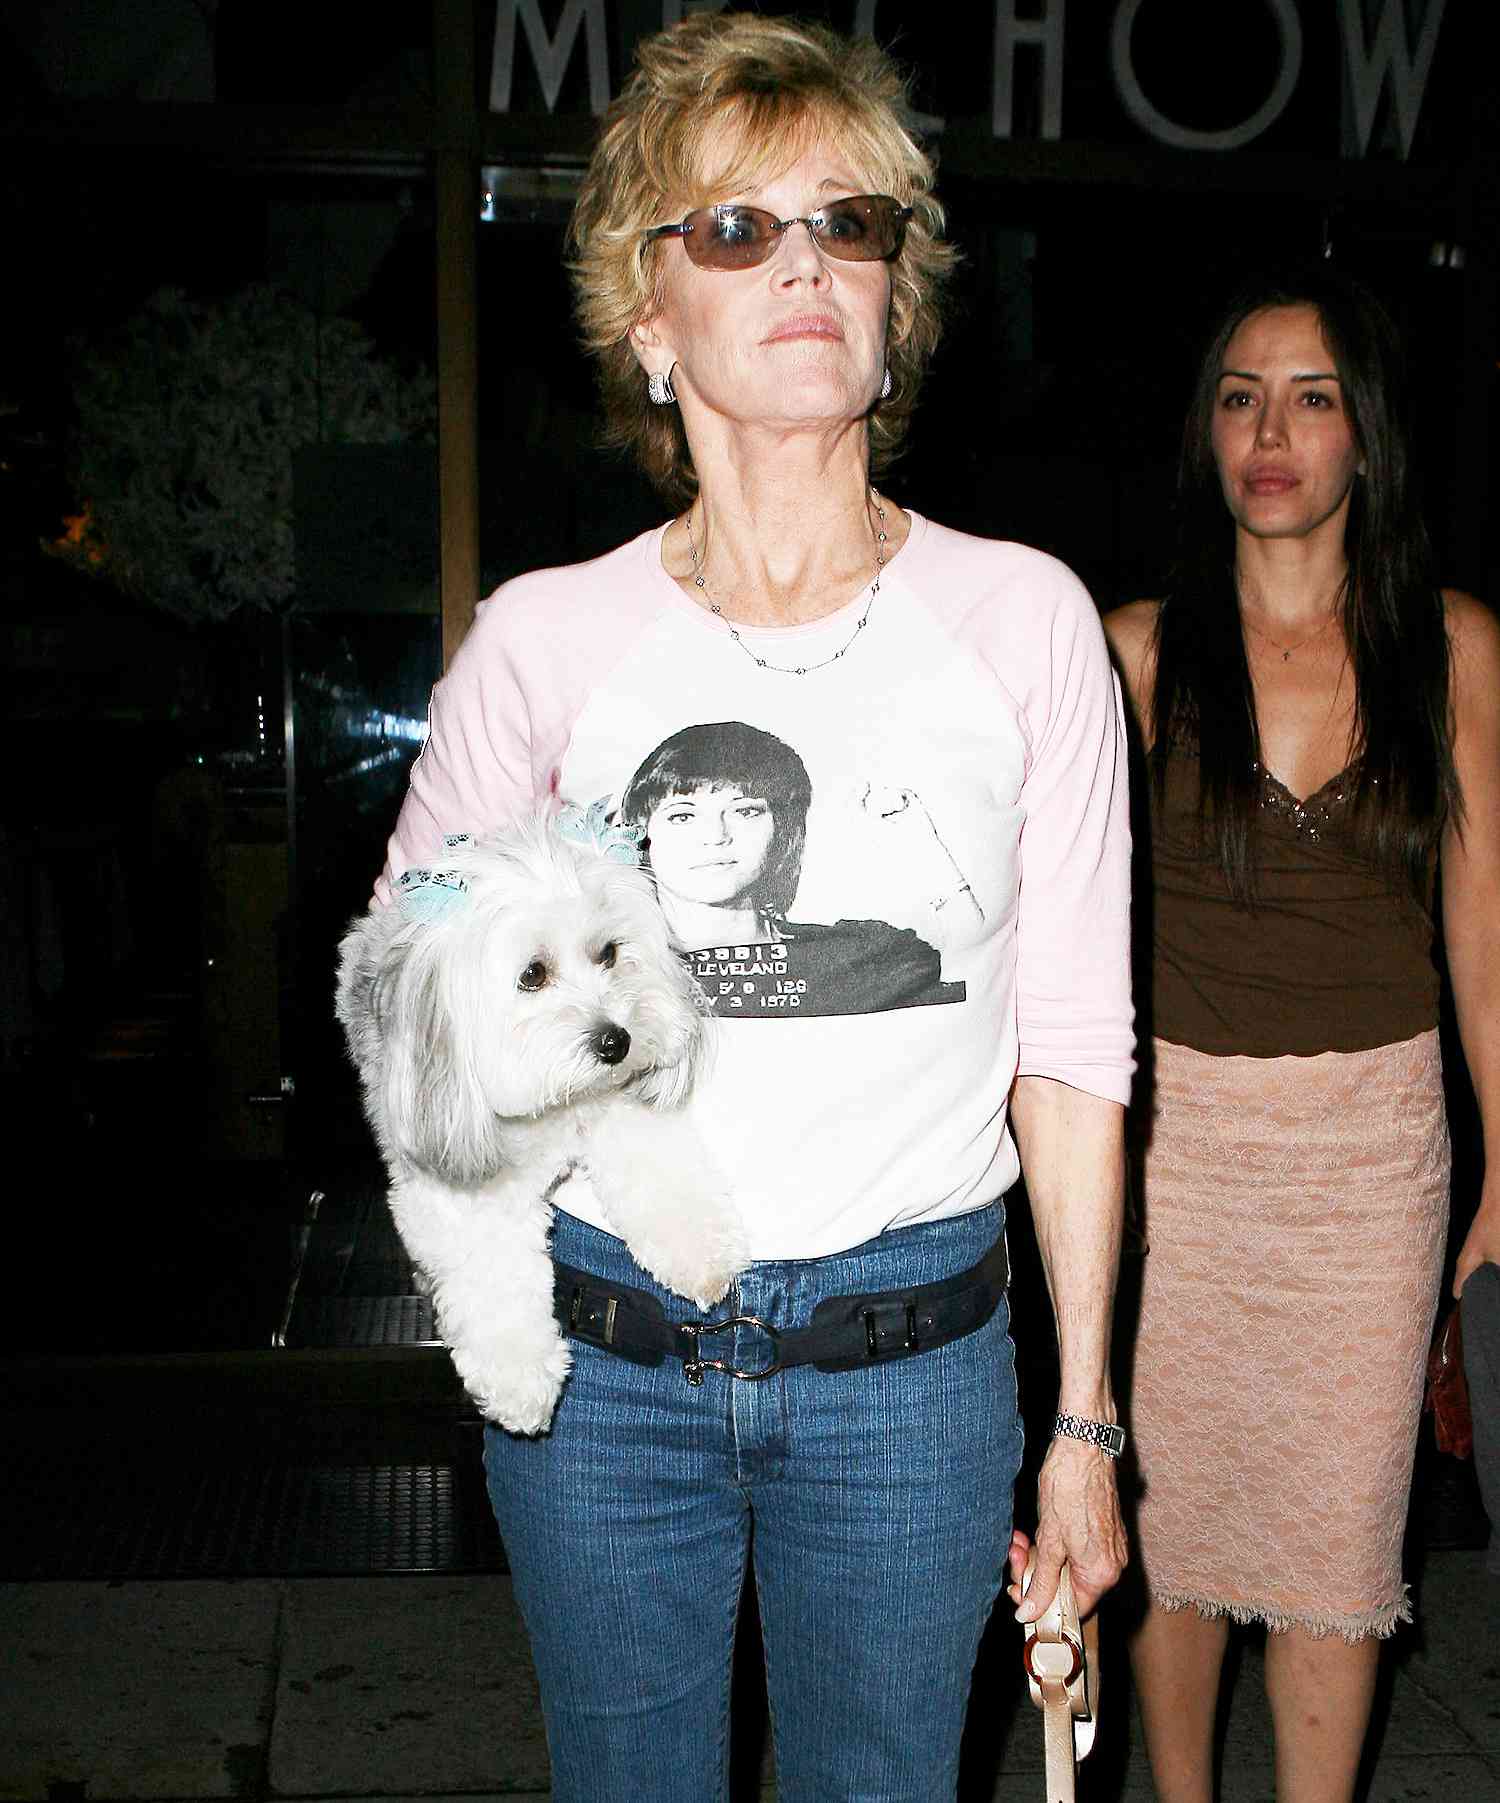 EXCLUSIVE Jane Fonda Proudly Wears Shirt with her 1970 Mugshot